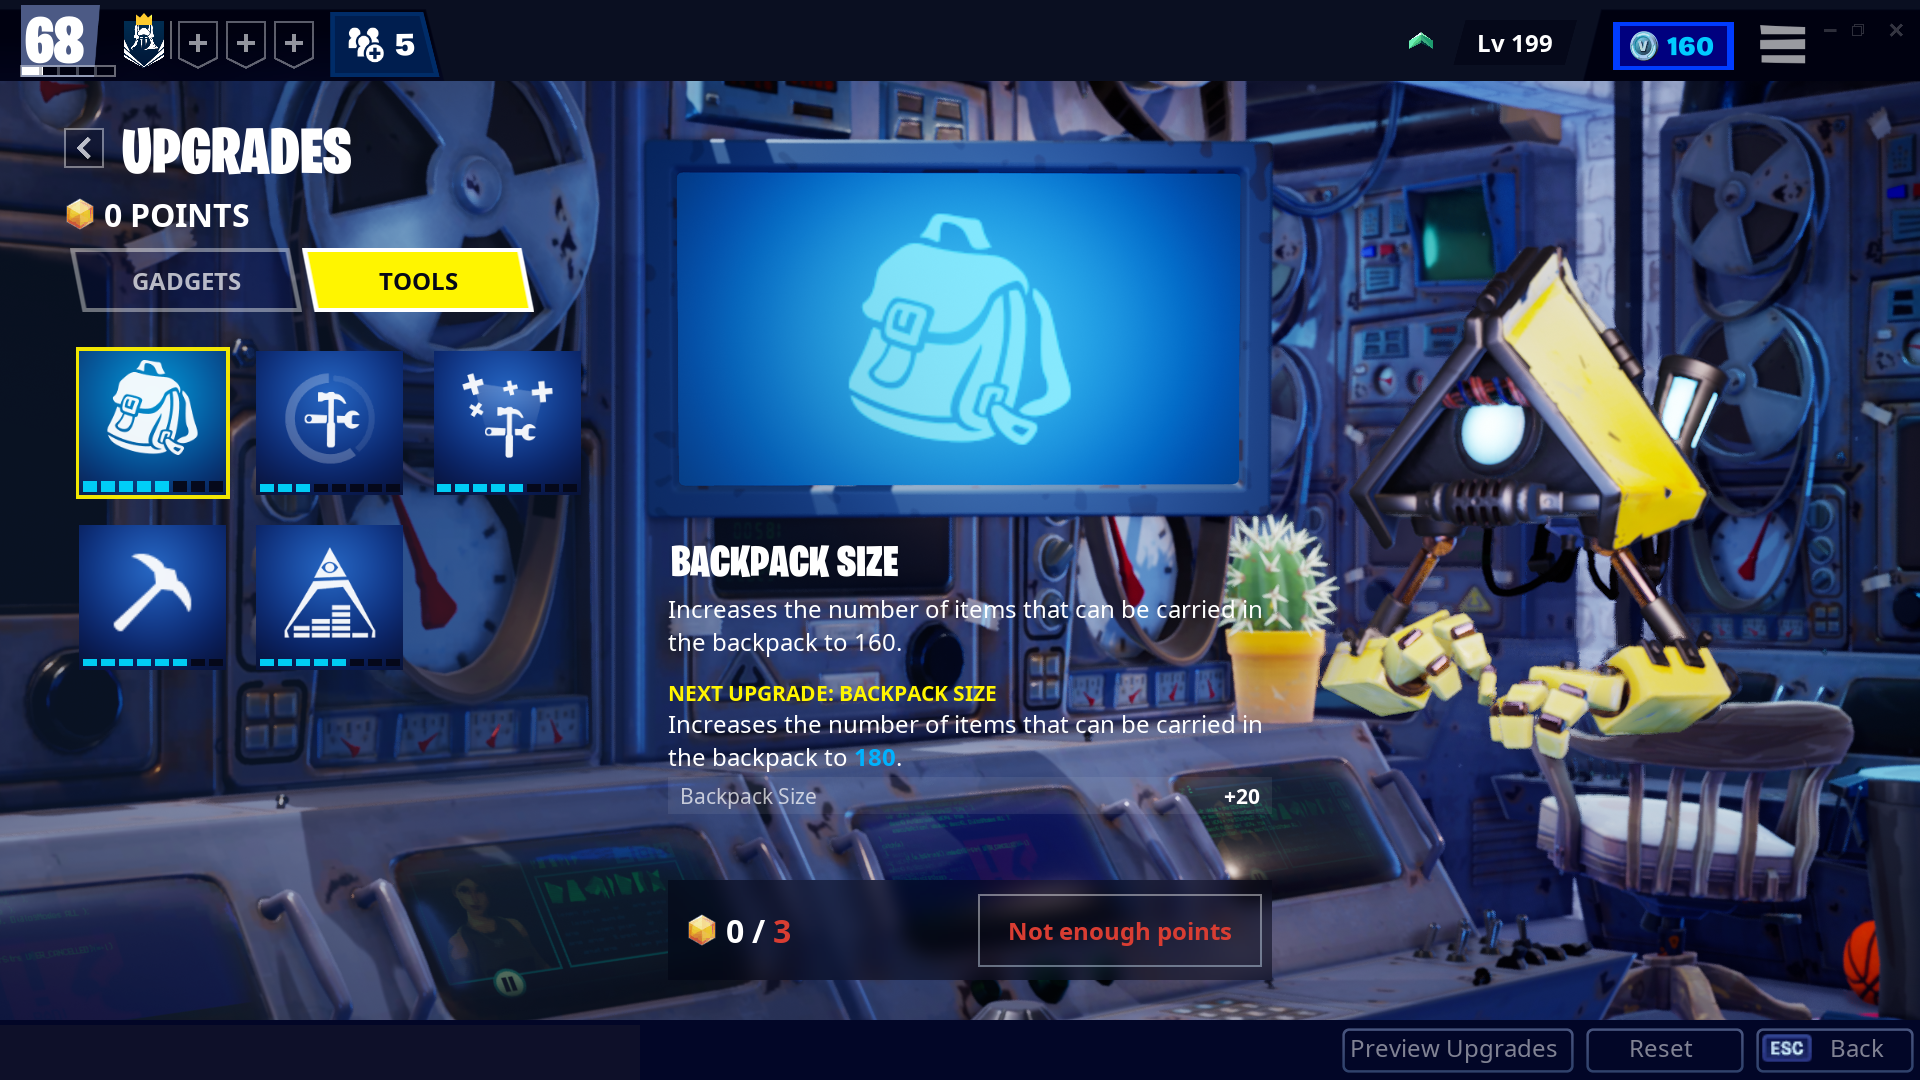 https://static.wikia.nocookie.net/fortnite/images/9/92/Upgrade_%28Tools%29_-_Menu_-_Fortnite.png/revision/latest?cb=20210108215003